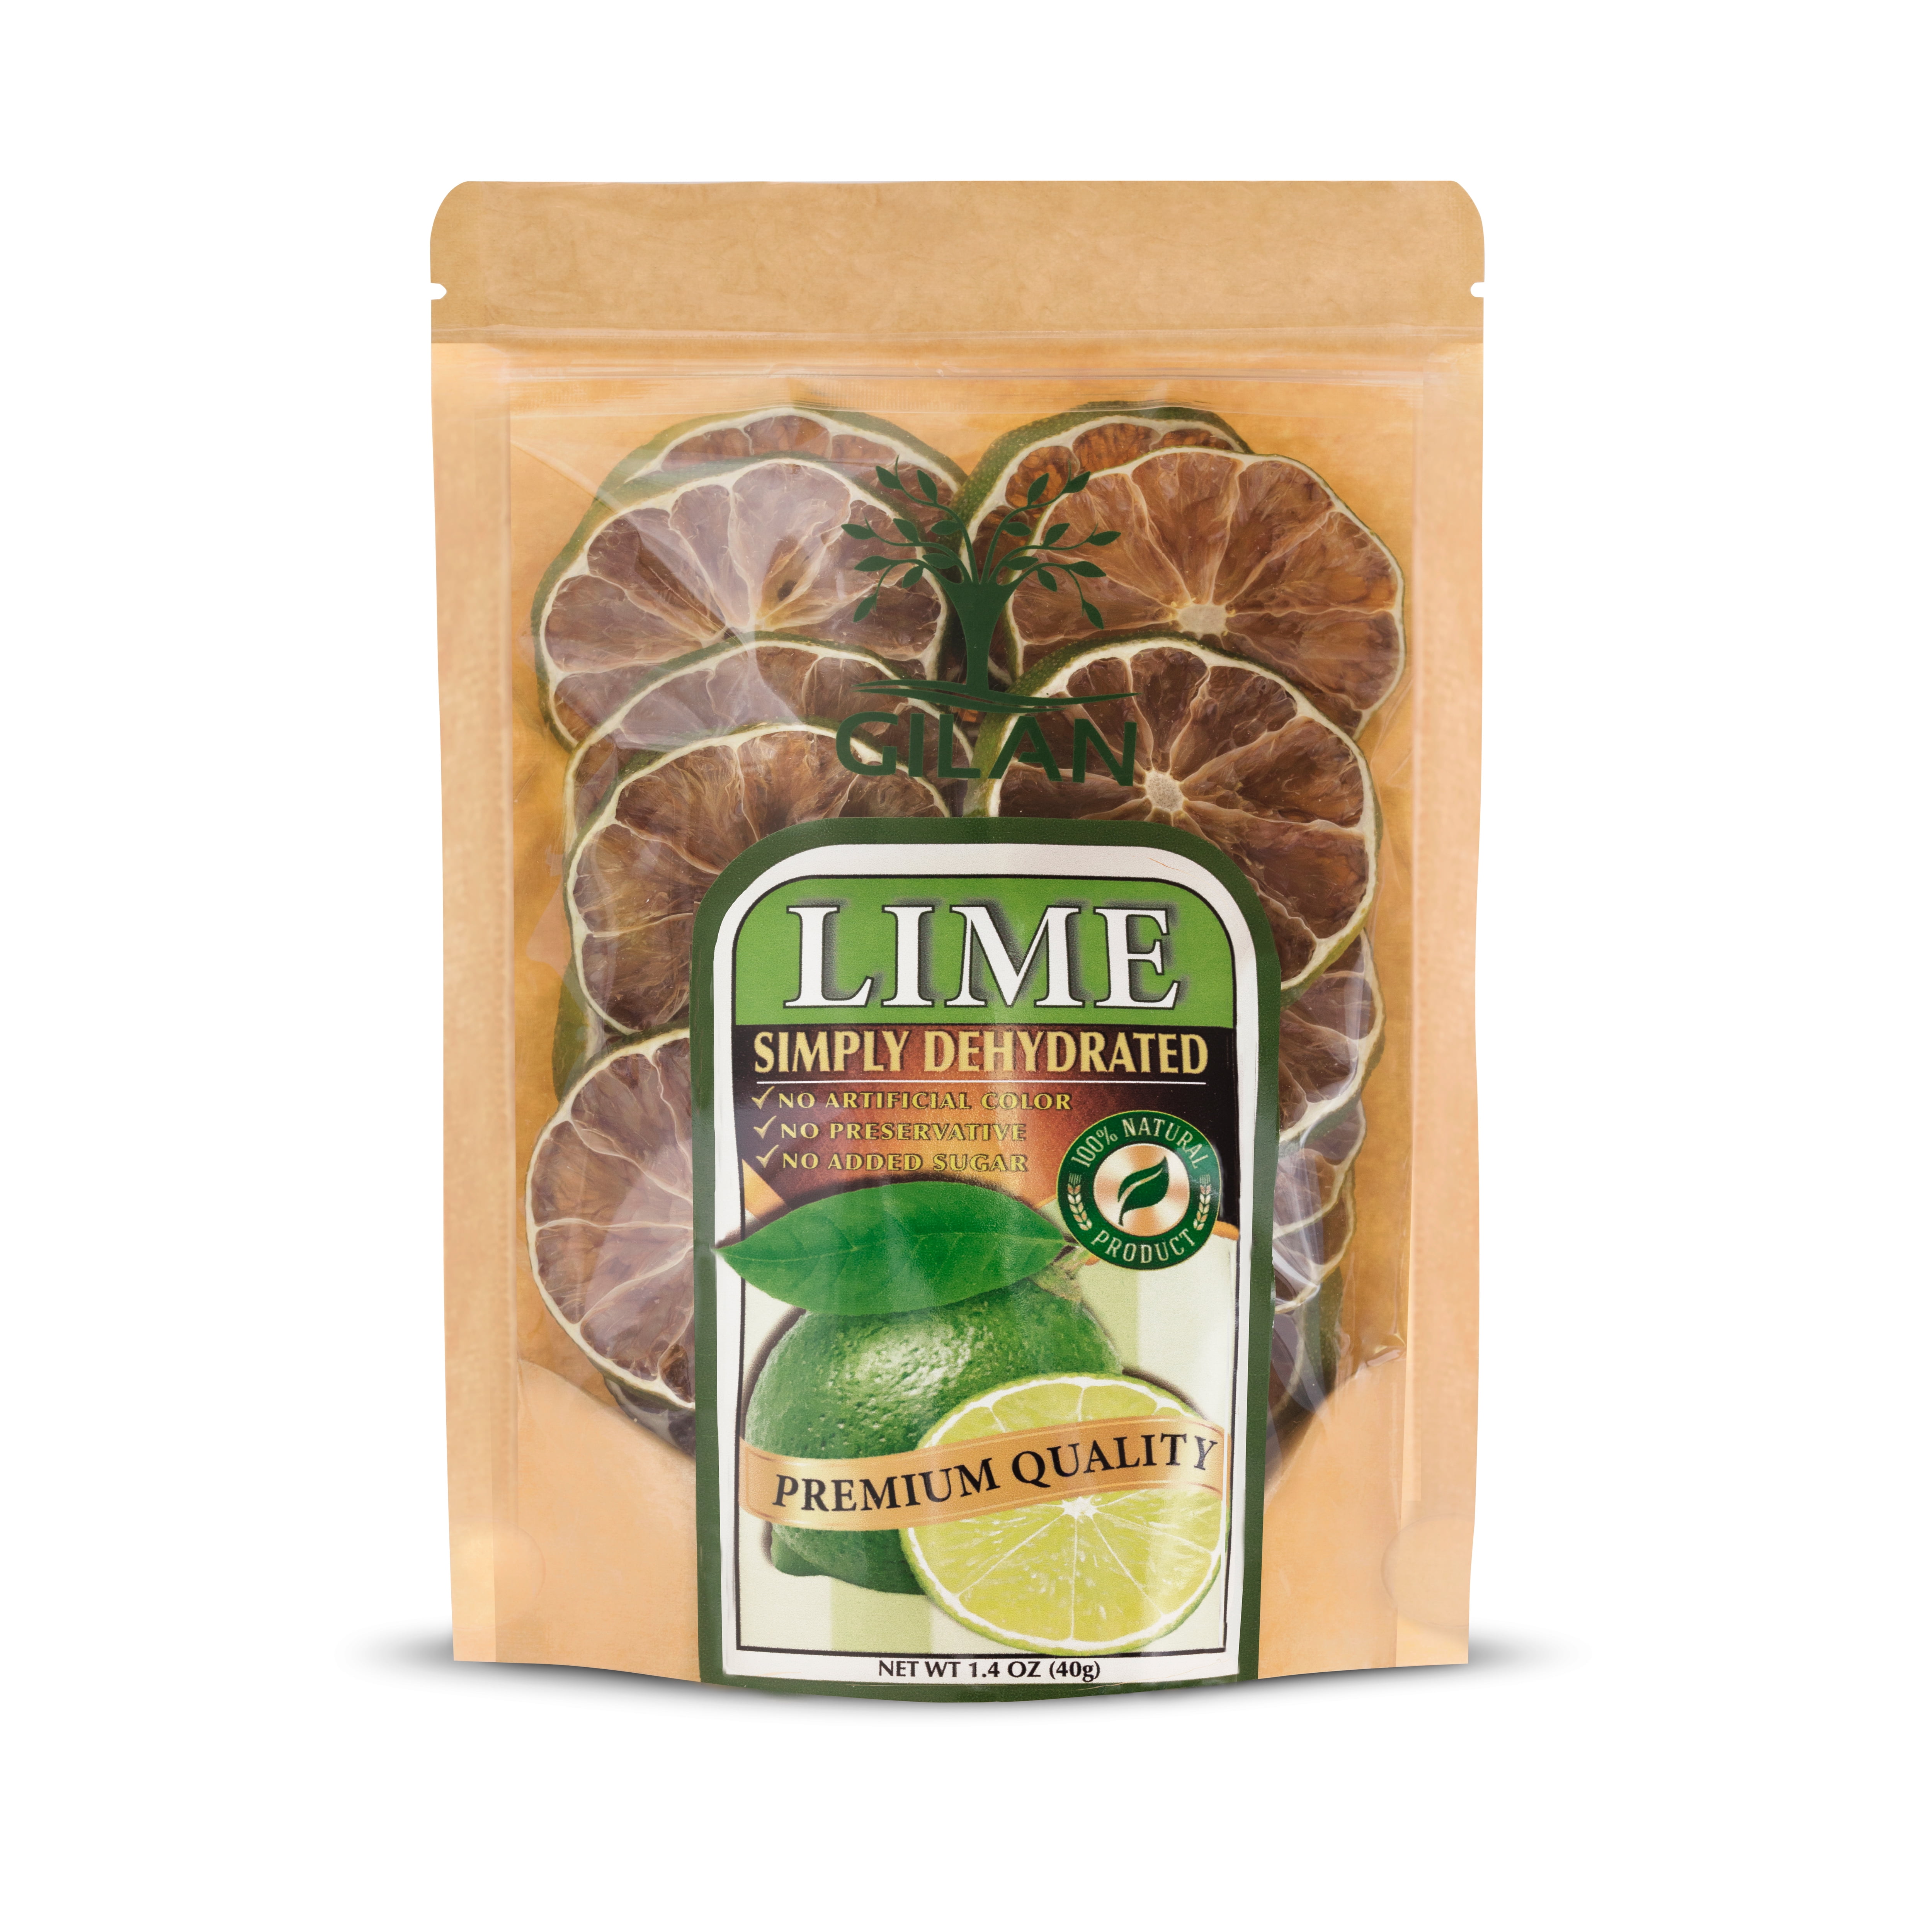 Freeze-Dried Lemon/Lime Slices for Water